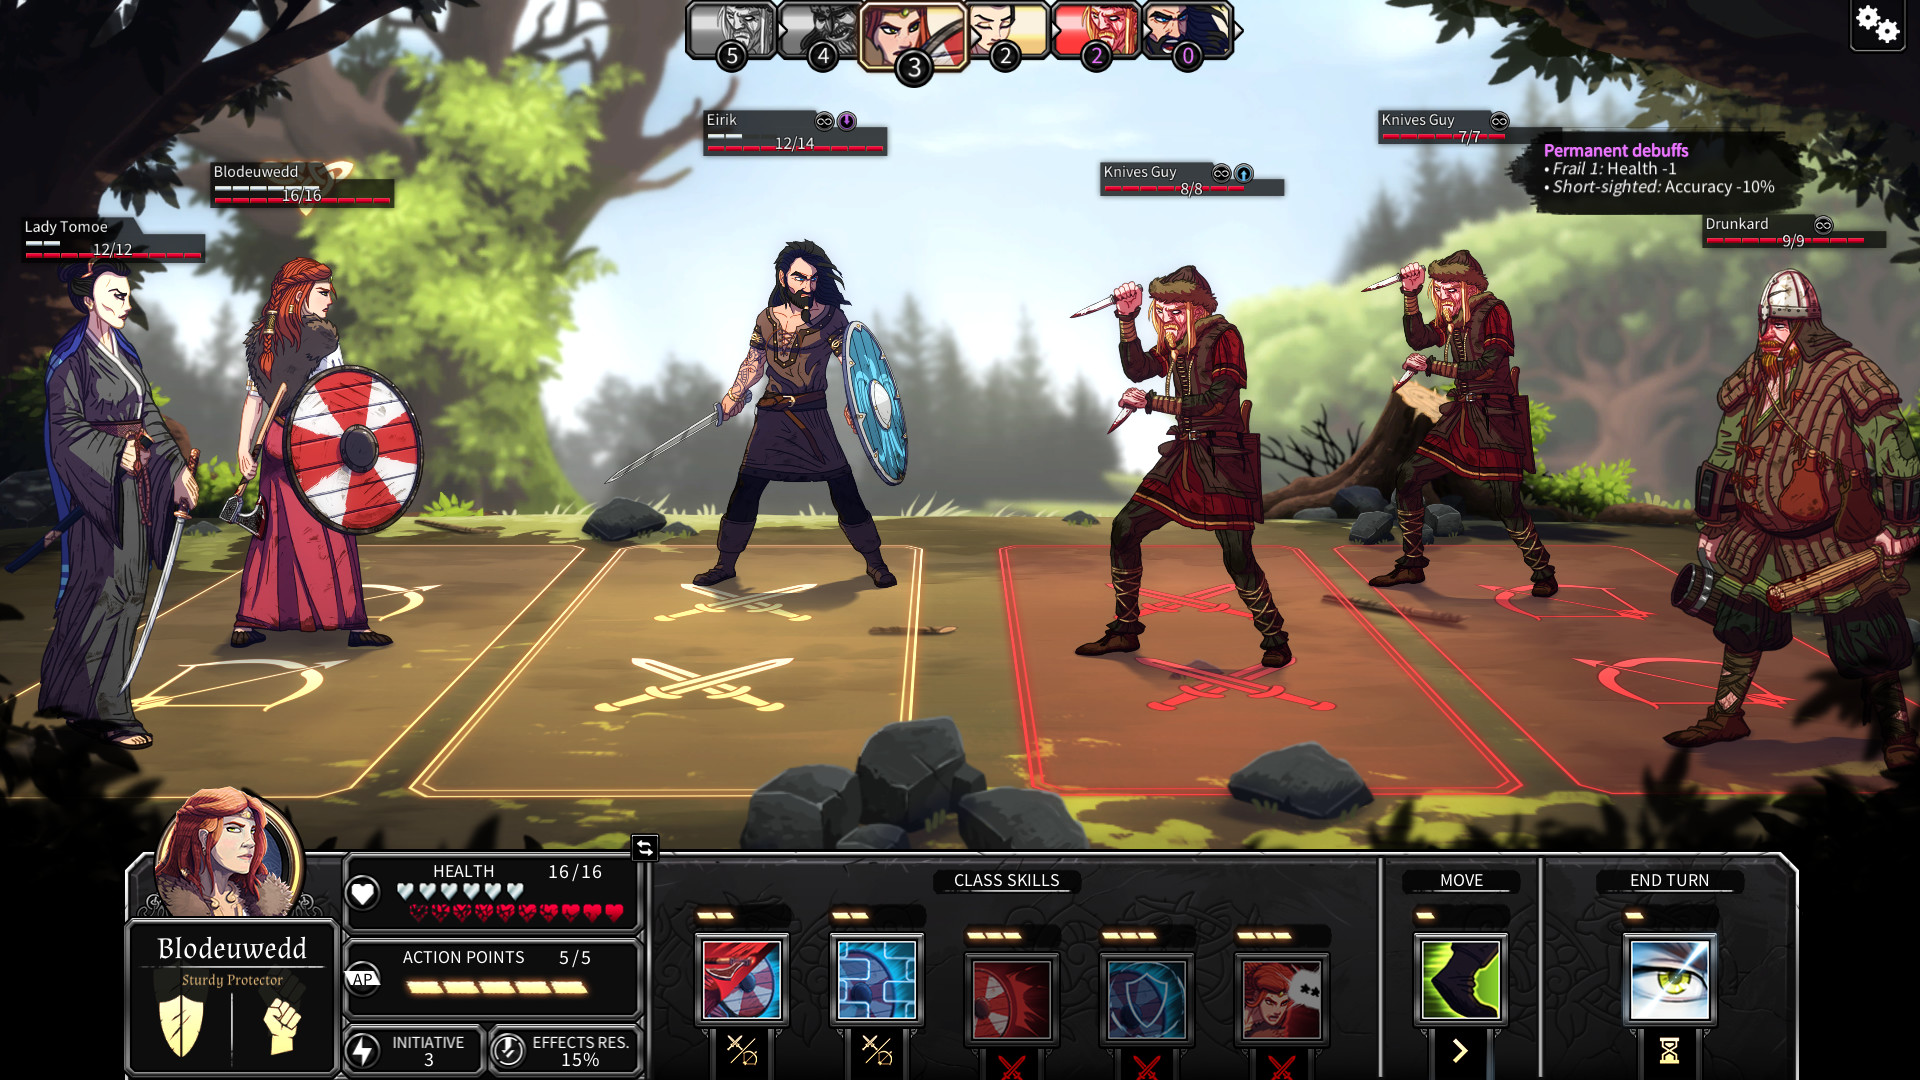 Dead in vinland - endless mode: battle of the heodenings download torrent